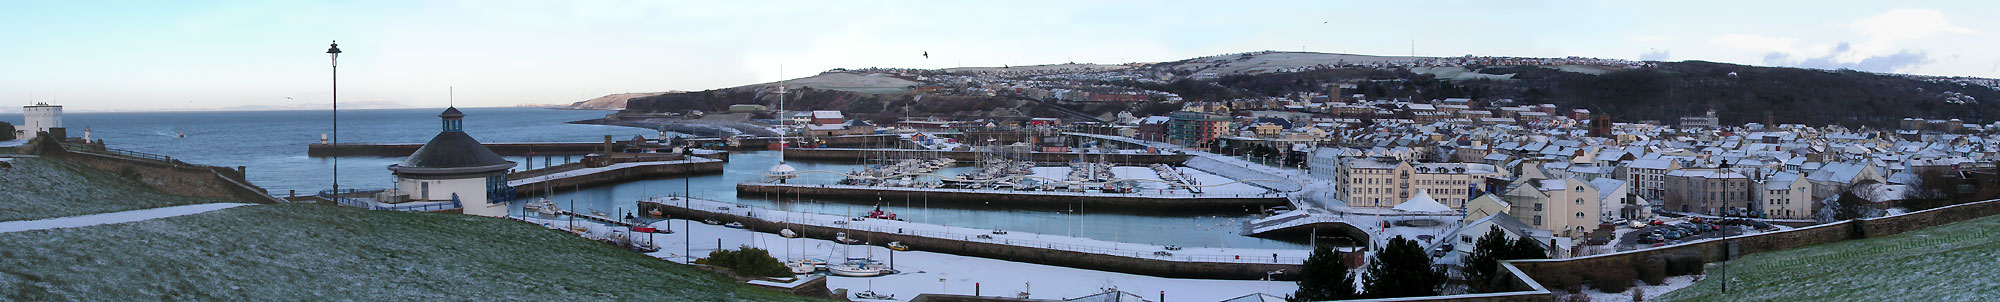 Panorama of Whitehaven Harbour in Snow